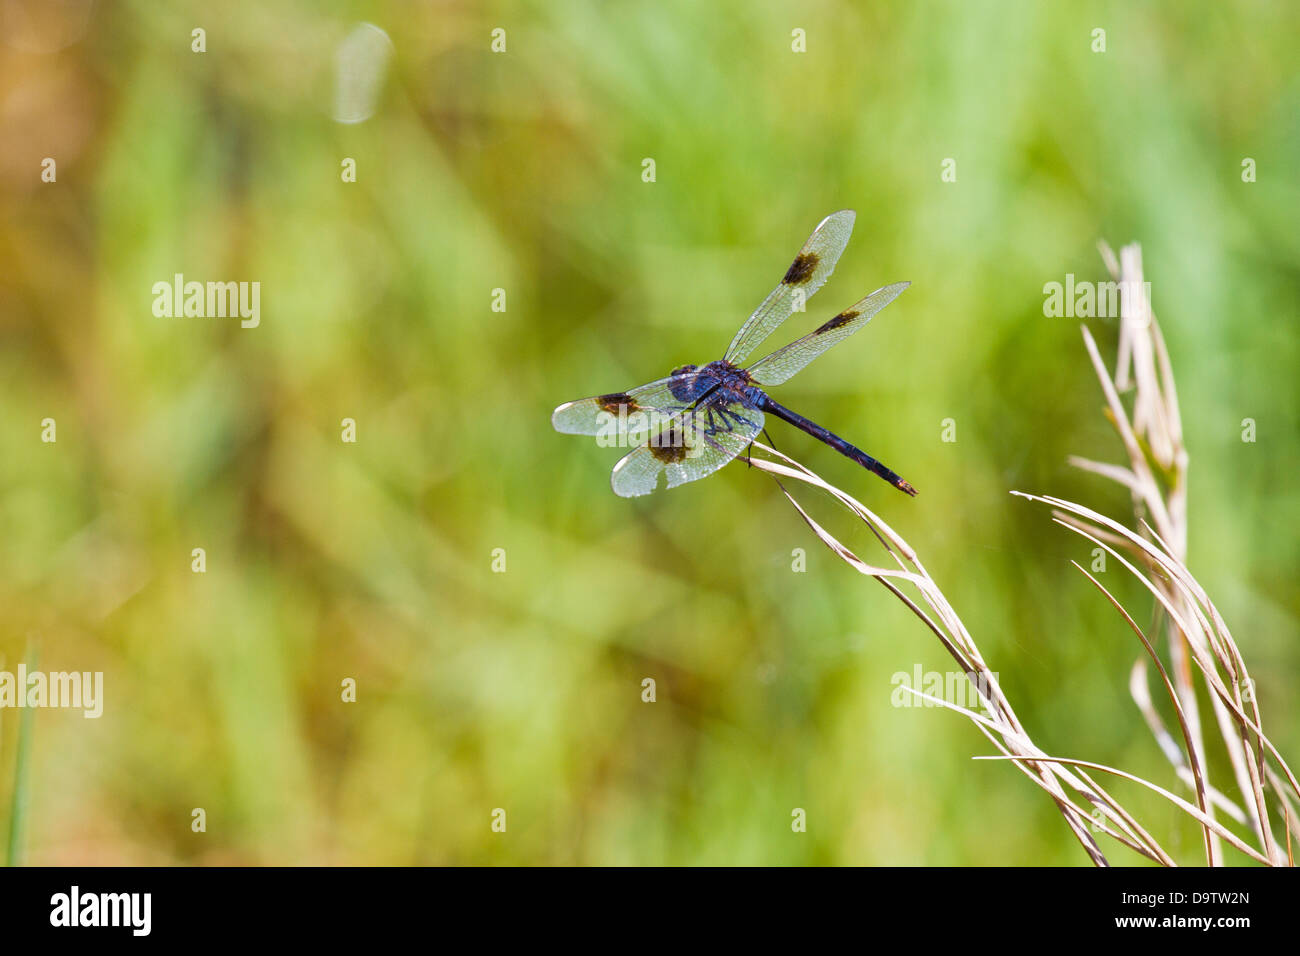 Dragonfly Poised For Take Off Stock Photo